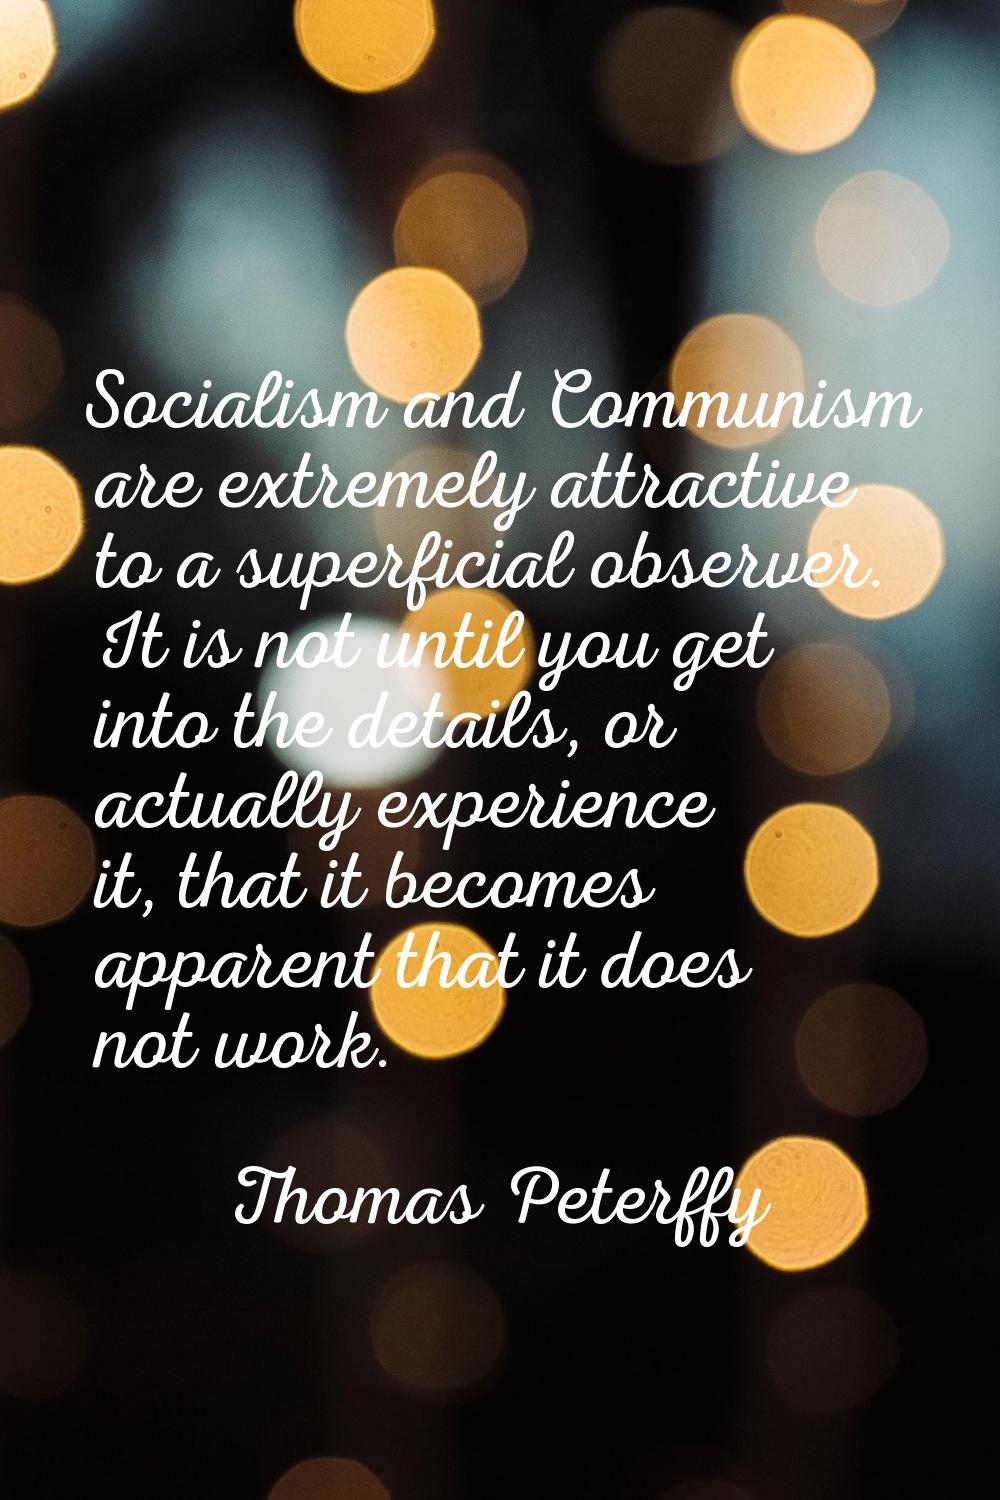 Socialism and Communism are extremely attractive to a superficial observer. It is not until you get